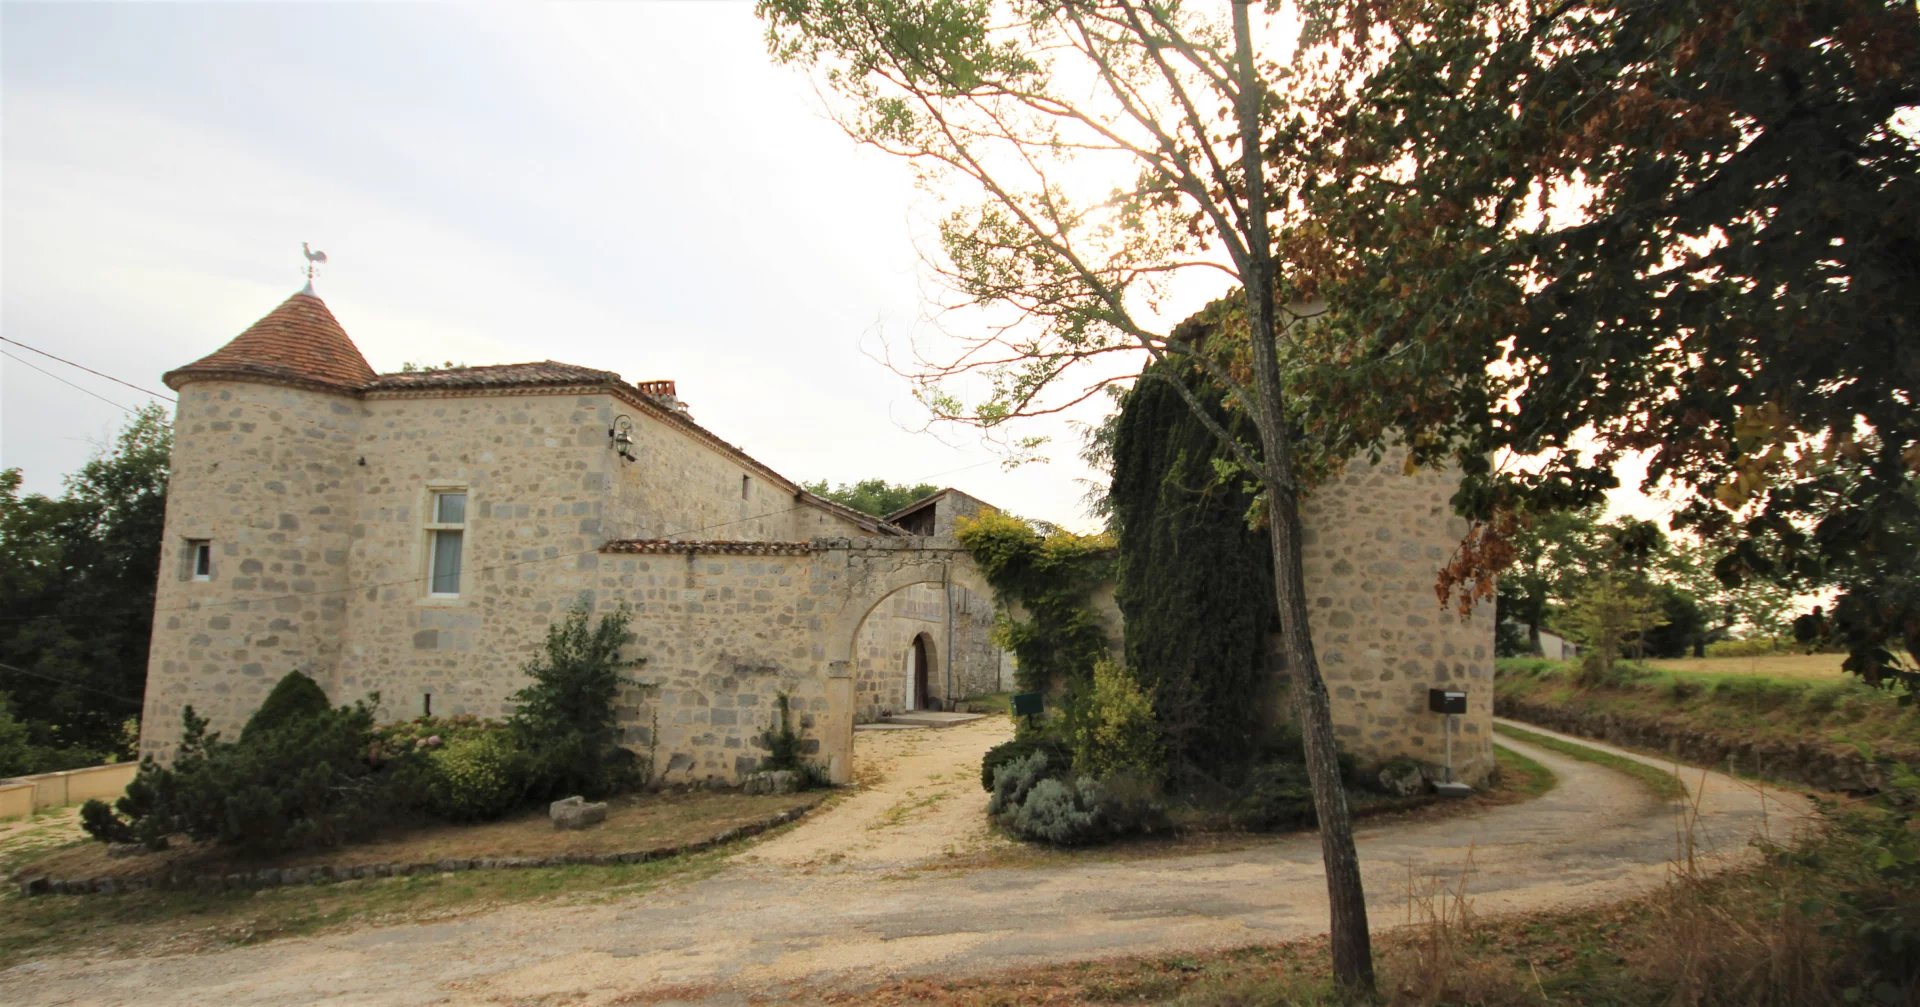 Traditional stone maison de maître conveniently located on the edge of a popular town.